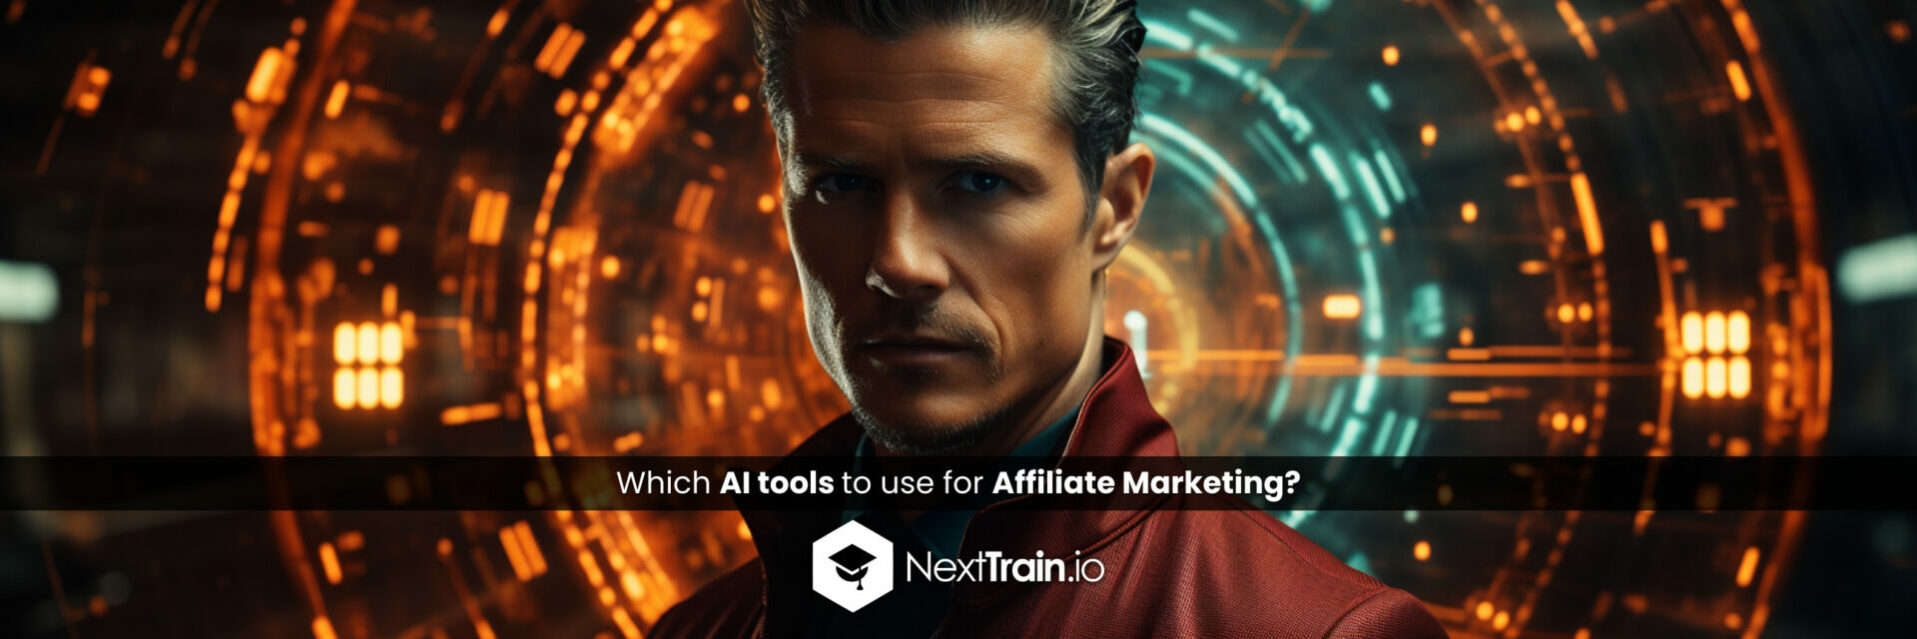 Which AI tools to use for Affiliate Marketing?